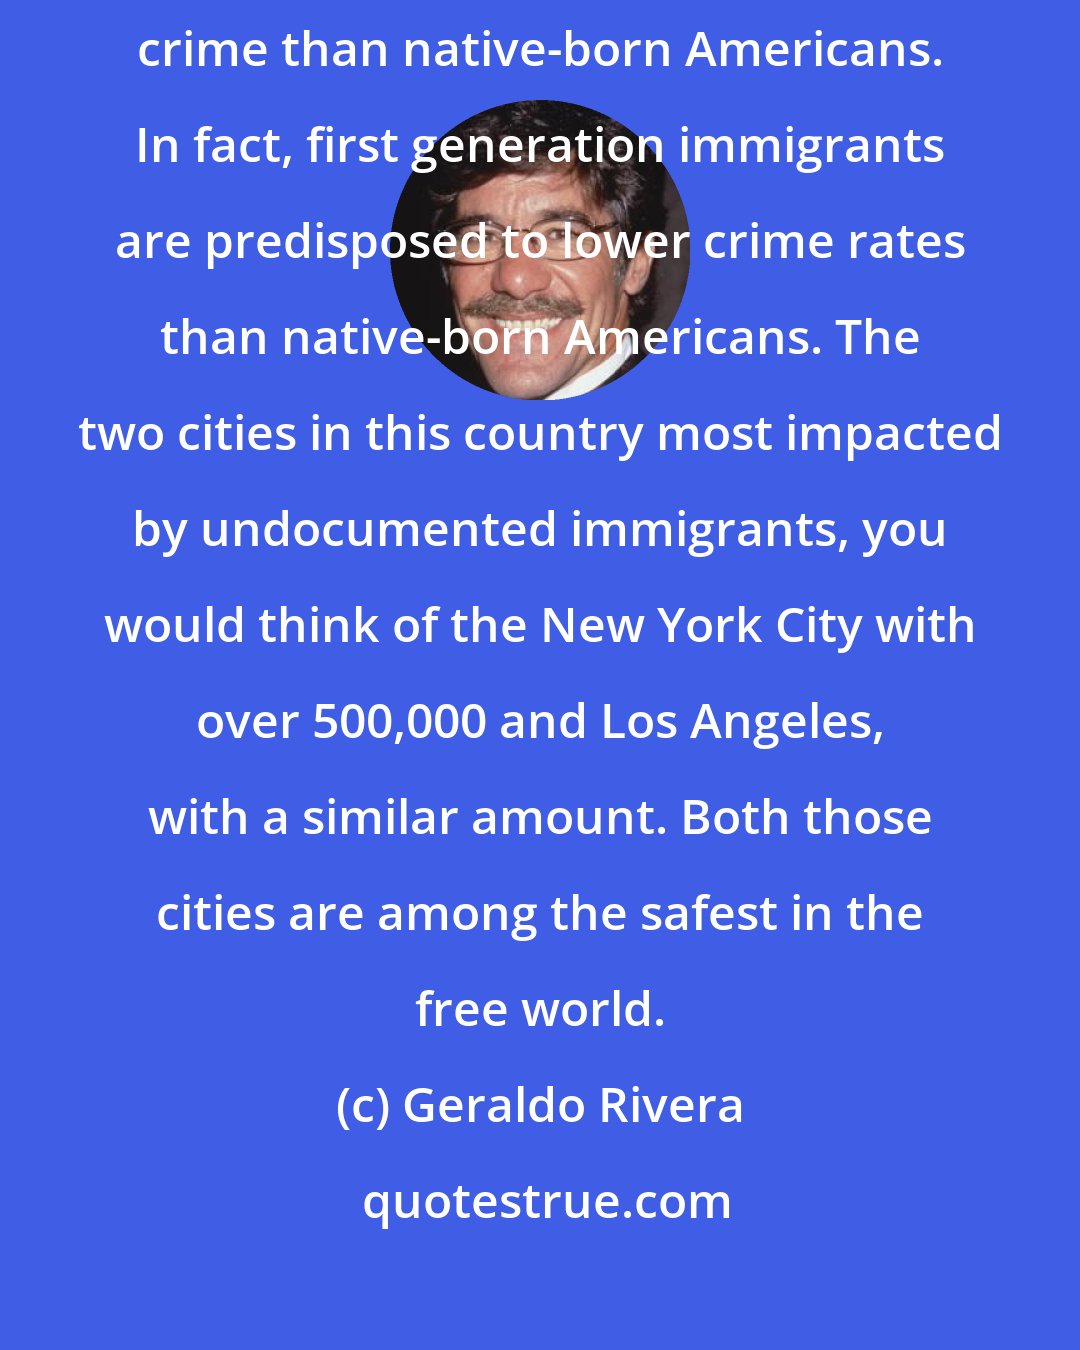 Geraldo Rivera: A range of studies shows there is no evidence immigrants commit more crime than native-born Americans. In fact, first generation immigrants are predisposed to lower crime rates than native-born Americans. The two cities in this country most impacted by undocumented immigrants, you would think of the New York City with over 500,000 and Los Angeles, with a similar amount. Both those cities are among the safest in the free world.